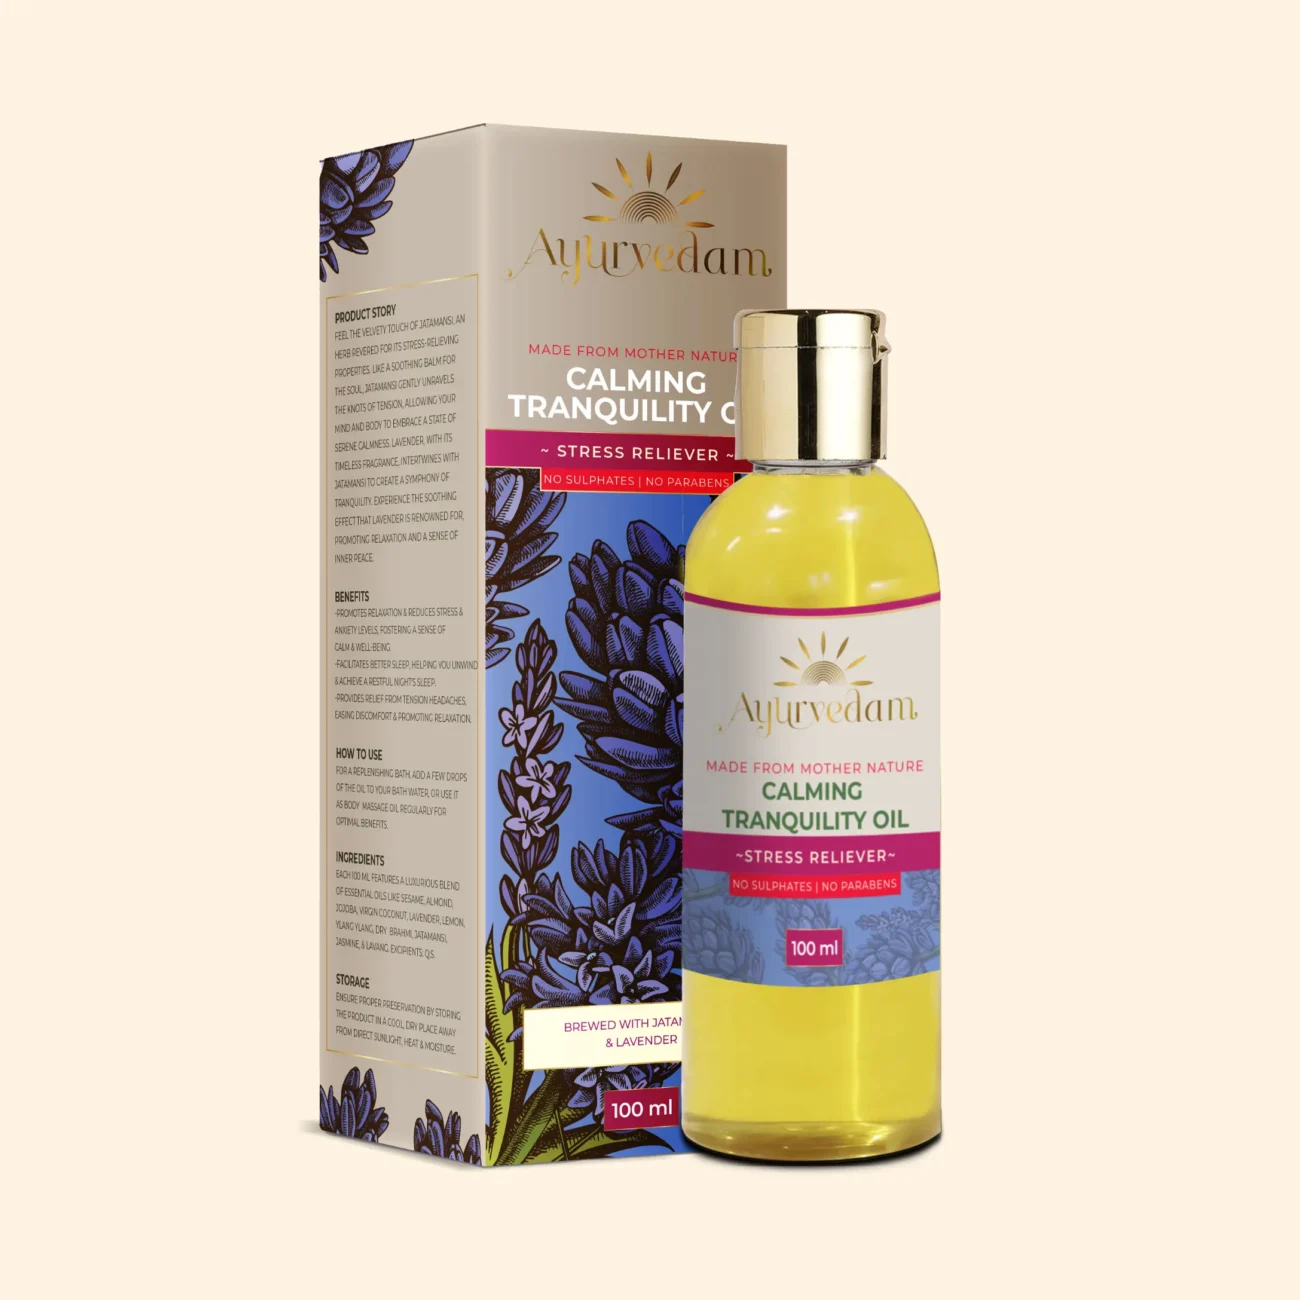 Calming Tranquility Oil, an ayurvedic body massage oil along with its package by Ayurvedam